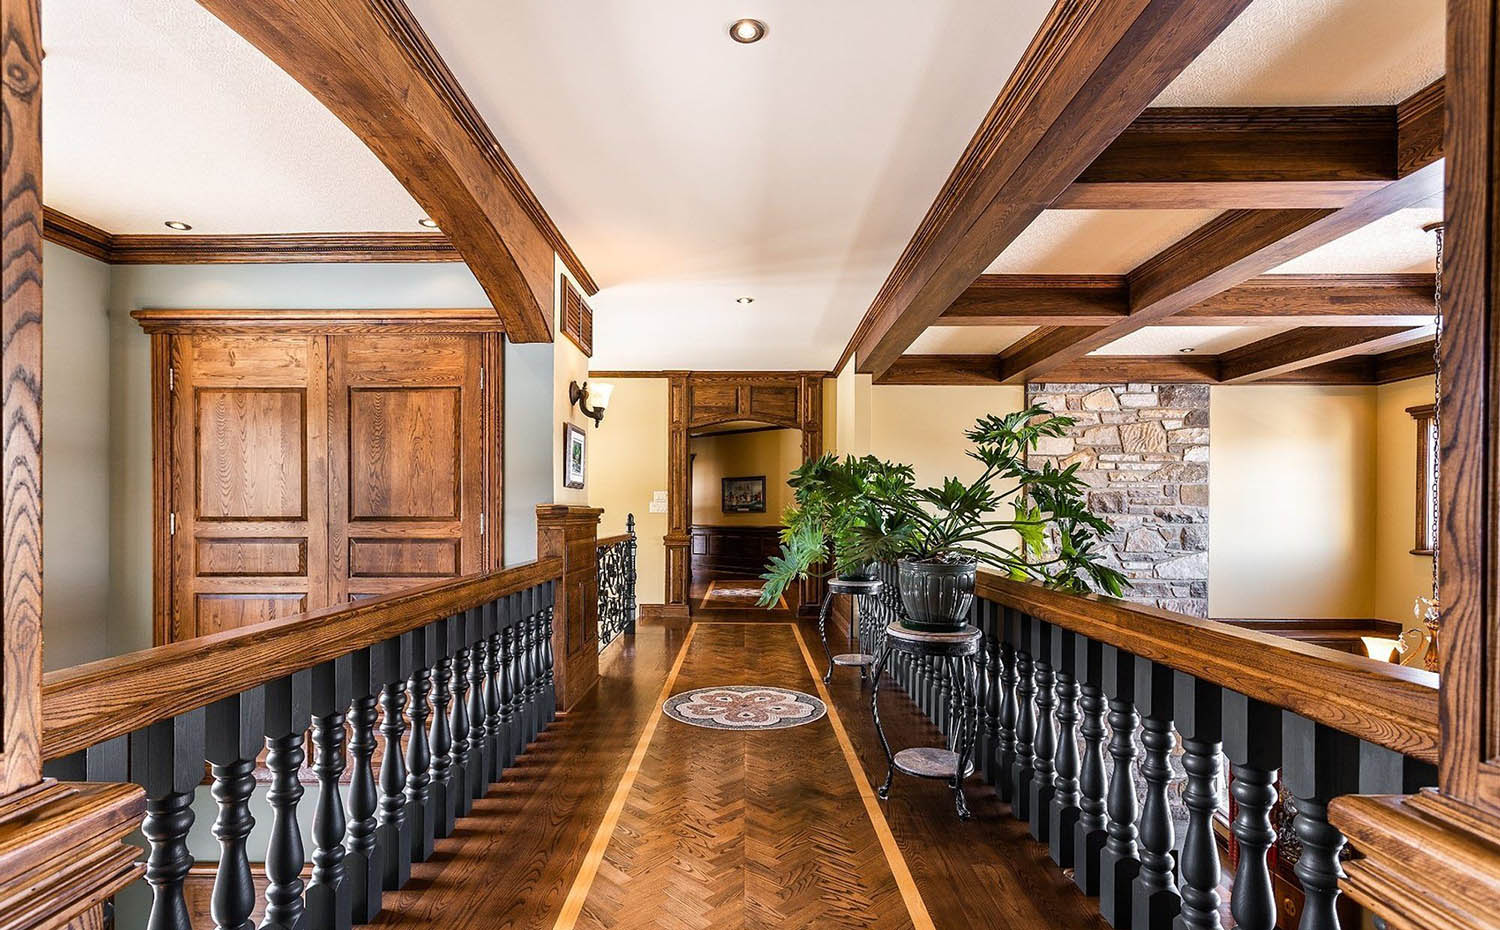 Real wood solid timber dropped beam coffered ceiling in a rustic styled home.